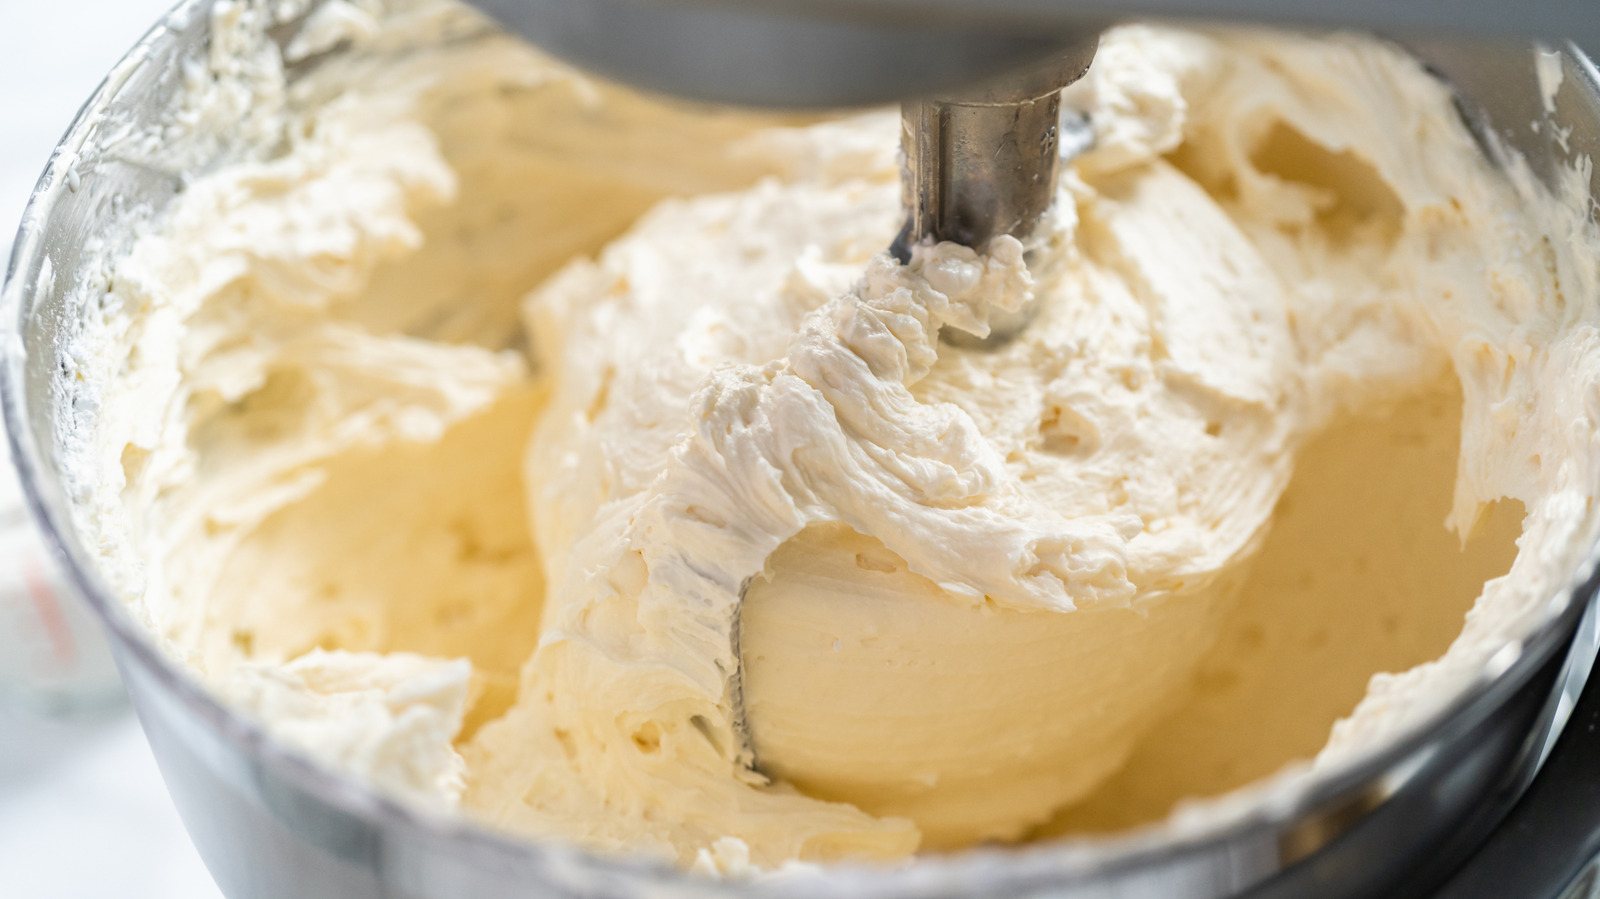 Ask a Food Editor: How to Cream Butter and Sugar - PureWow